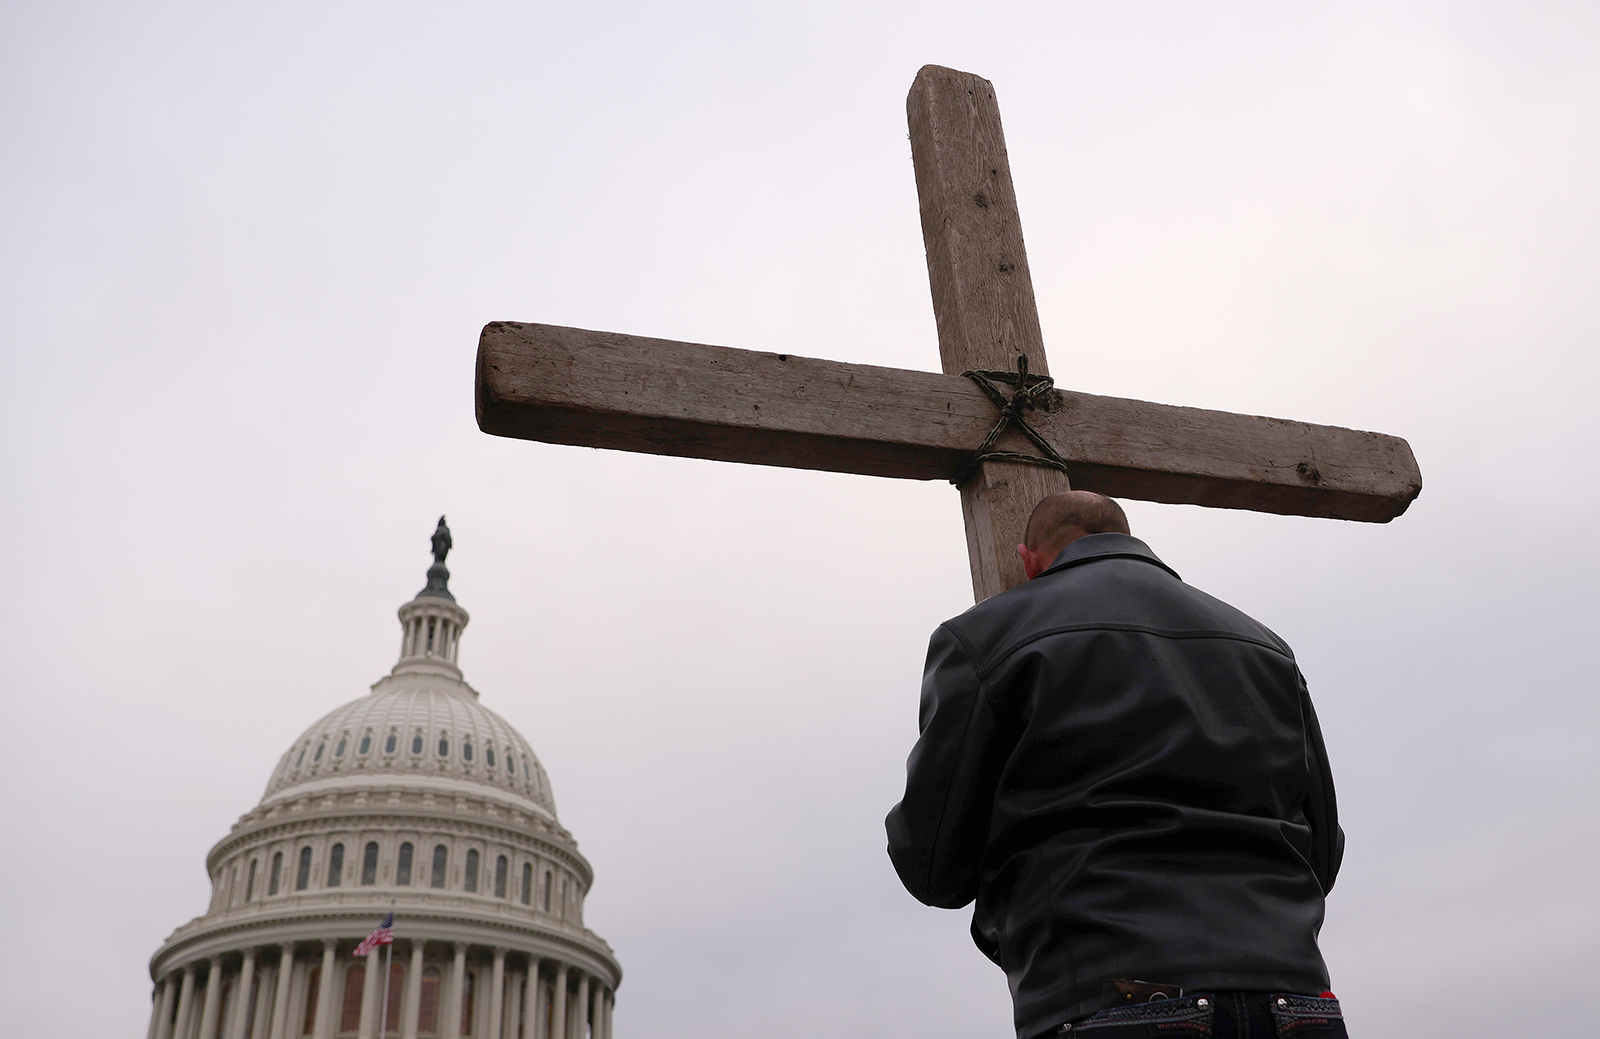 Politics Supporters of U.S. President Donald Trump put up a Cross outside the U.S. Capitol on Jan. 6, 2021. (Photo by Win McNamee/Getty Images)